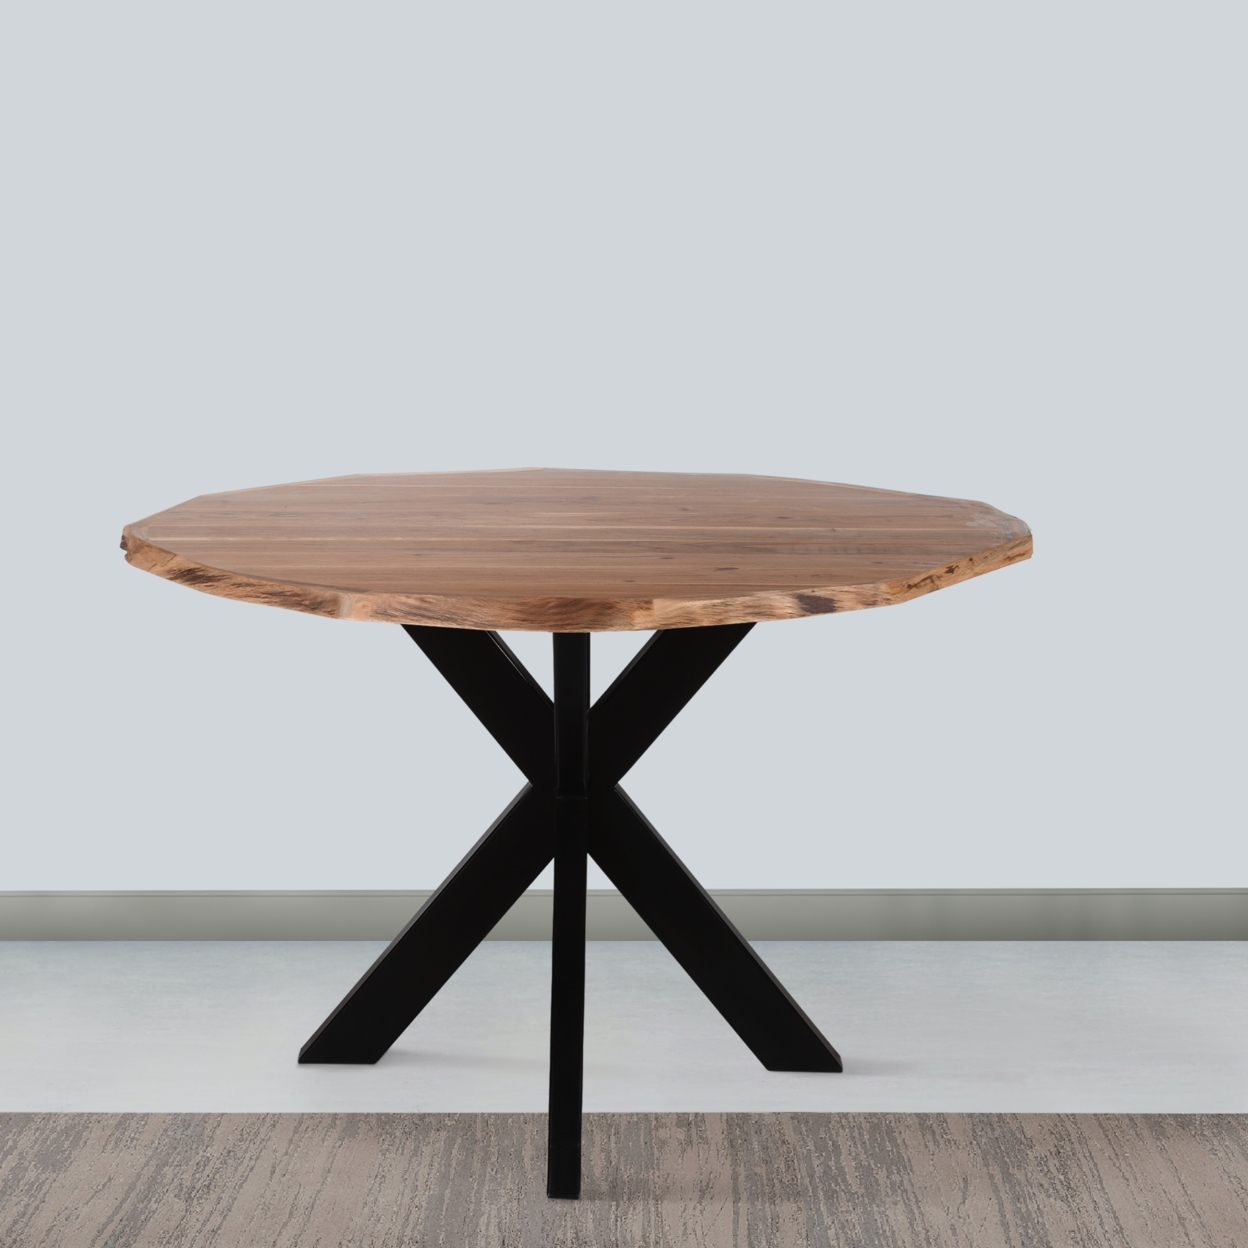 41 Inch Handcrafted Live Edge Round Dining Table With A Natural Brown Acacia Wood Top And Black Iron Legs- Saltoro Sherpi